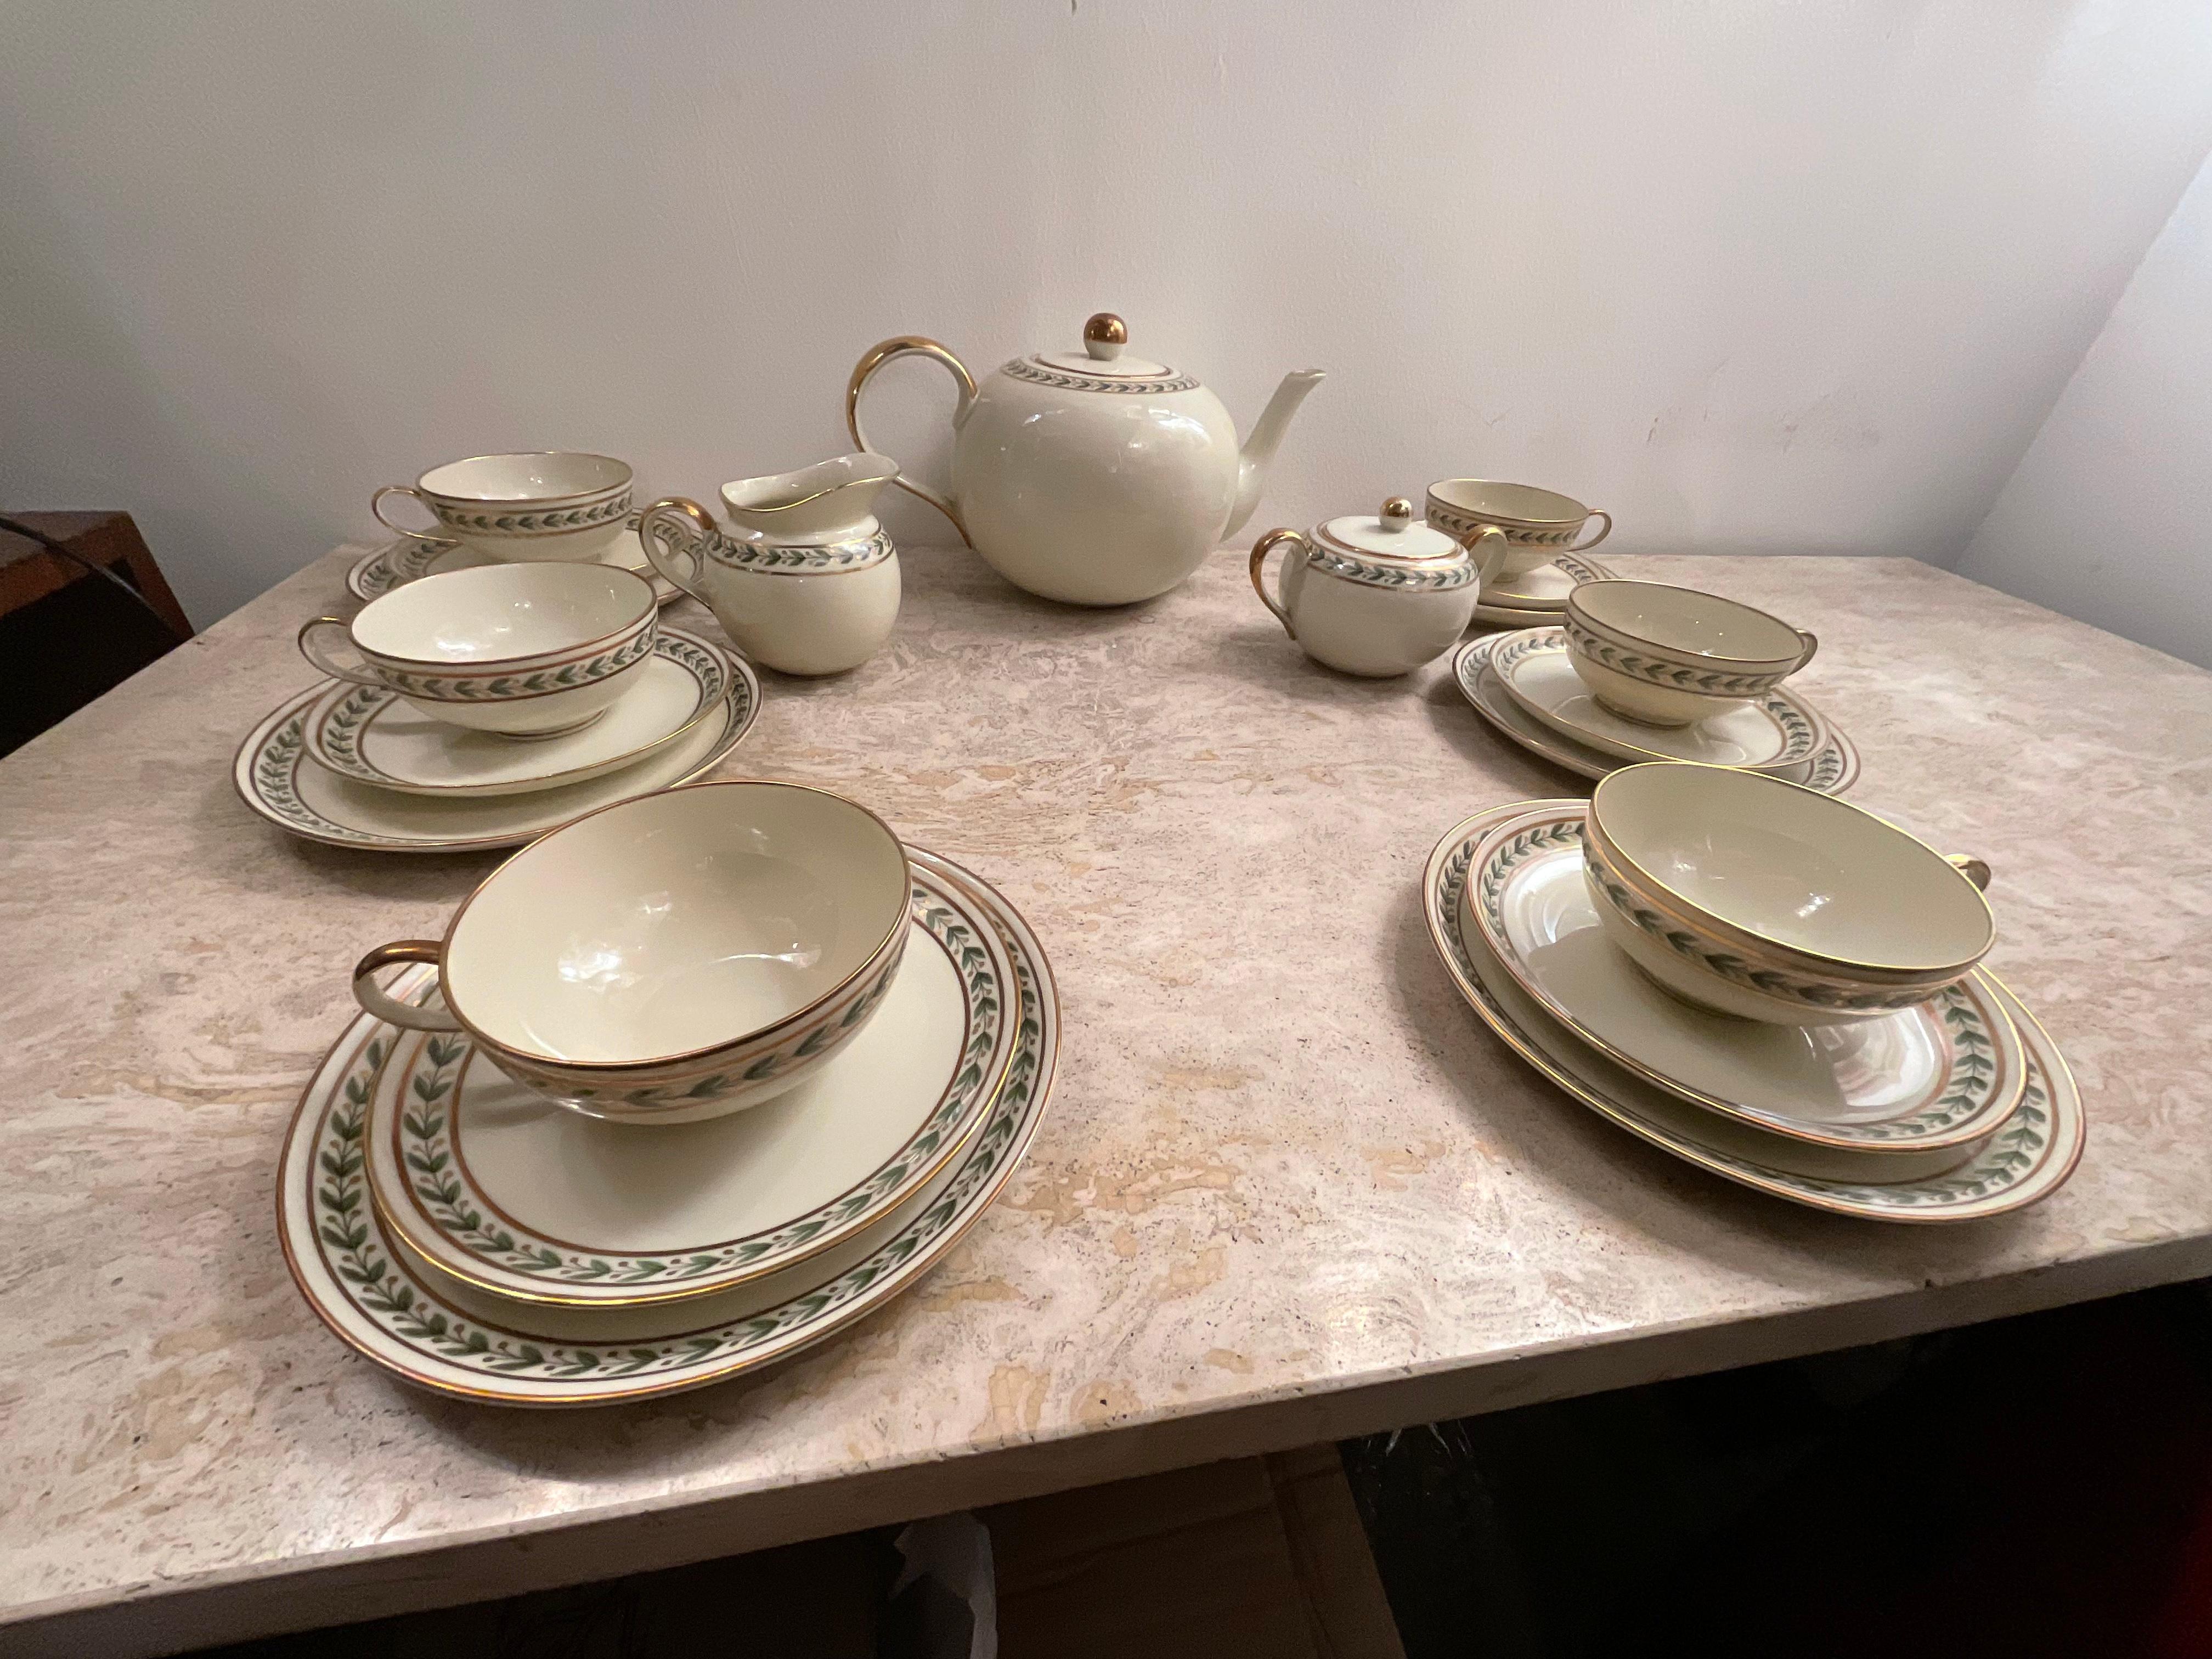 Gio Ponti, Tea for 6 with Dessert Plates, in Porcelain Richard Ginori, Year 1939 For Sale 5